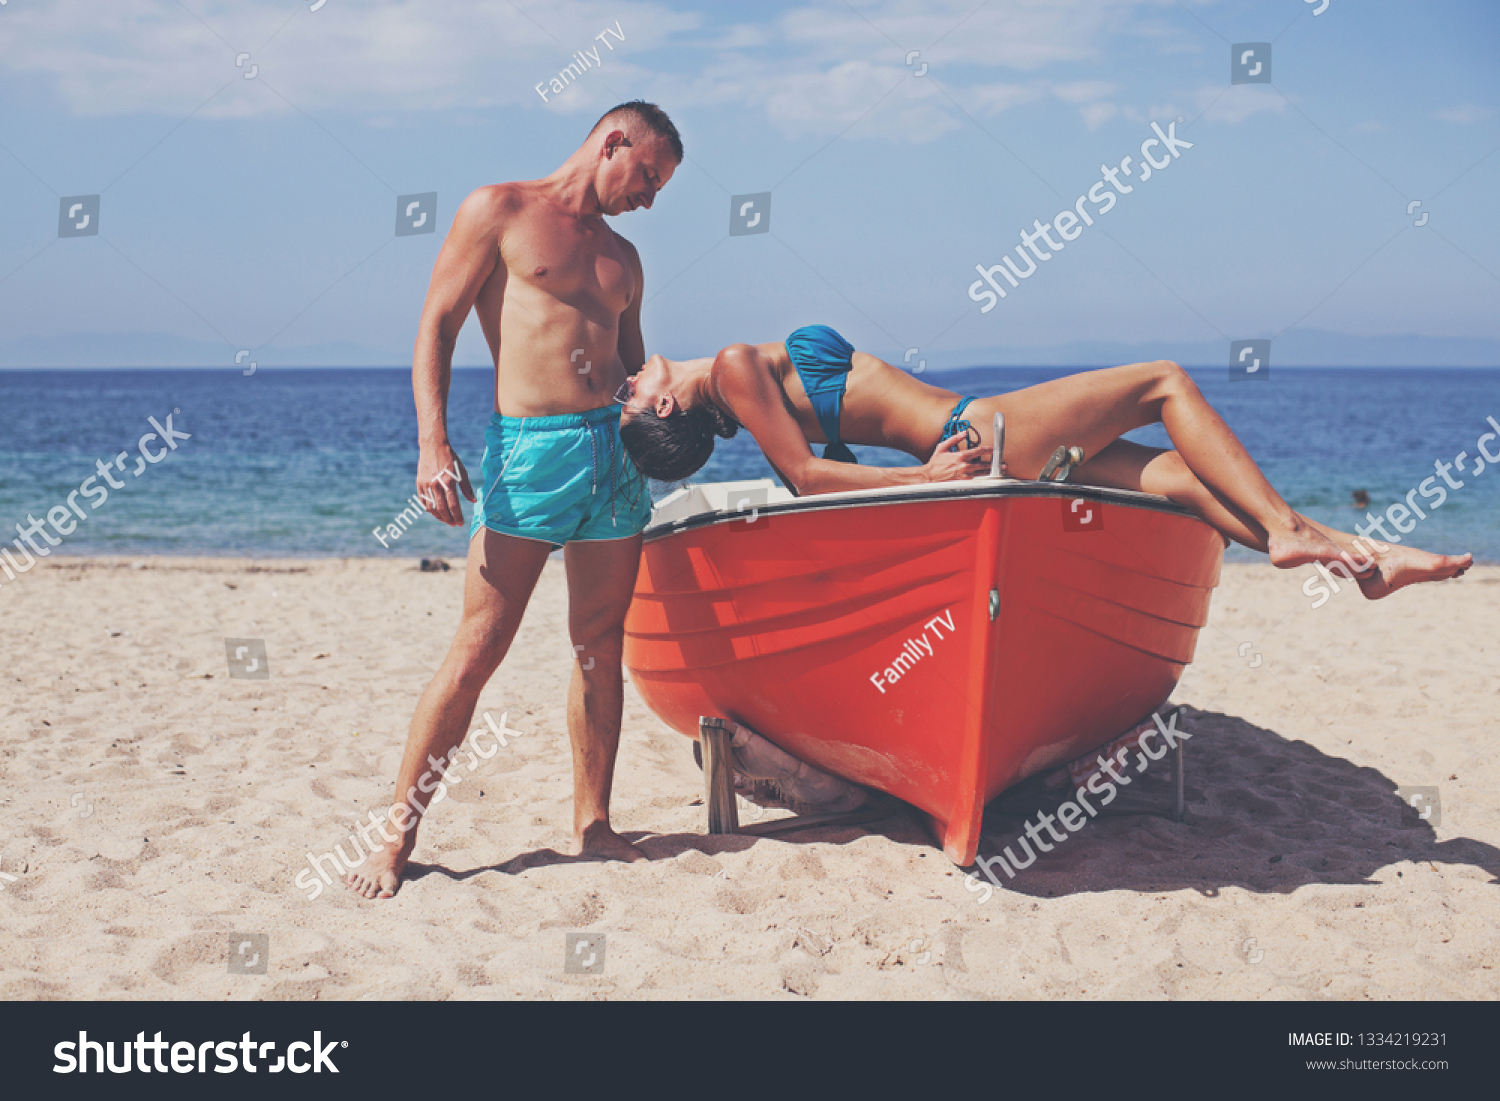 Sea couple. Couple in love. Adult. Old boat. Travel. Vacation. Travel concept. Sexy girl. Sensual. Romance lovers. Sea background. Life. Dream.  #1334219231